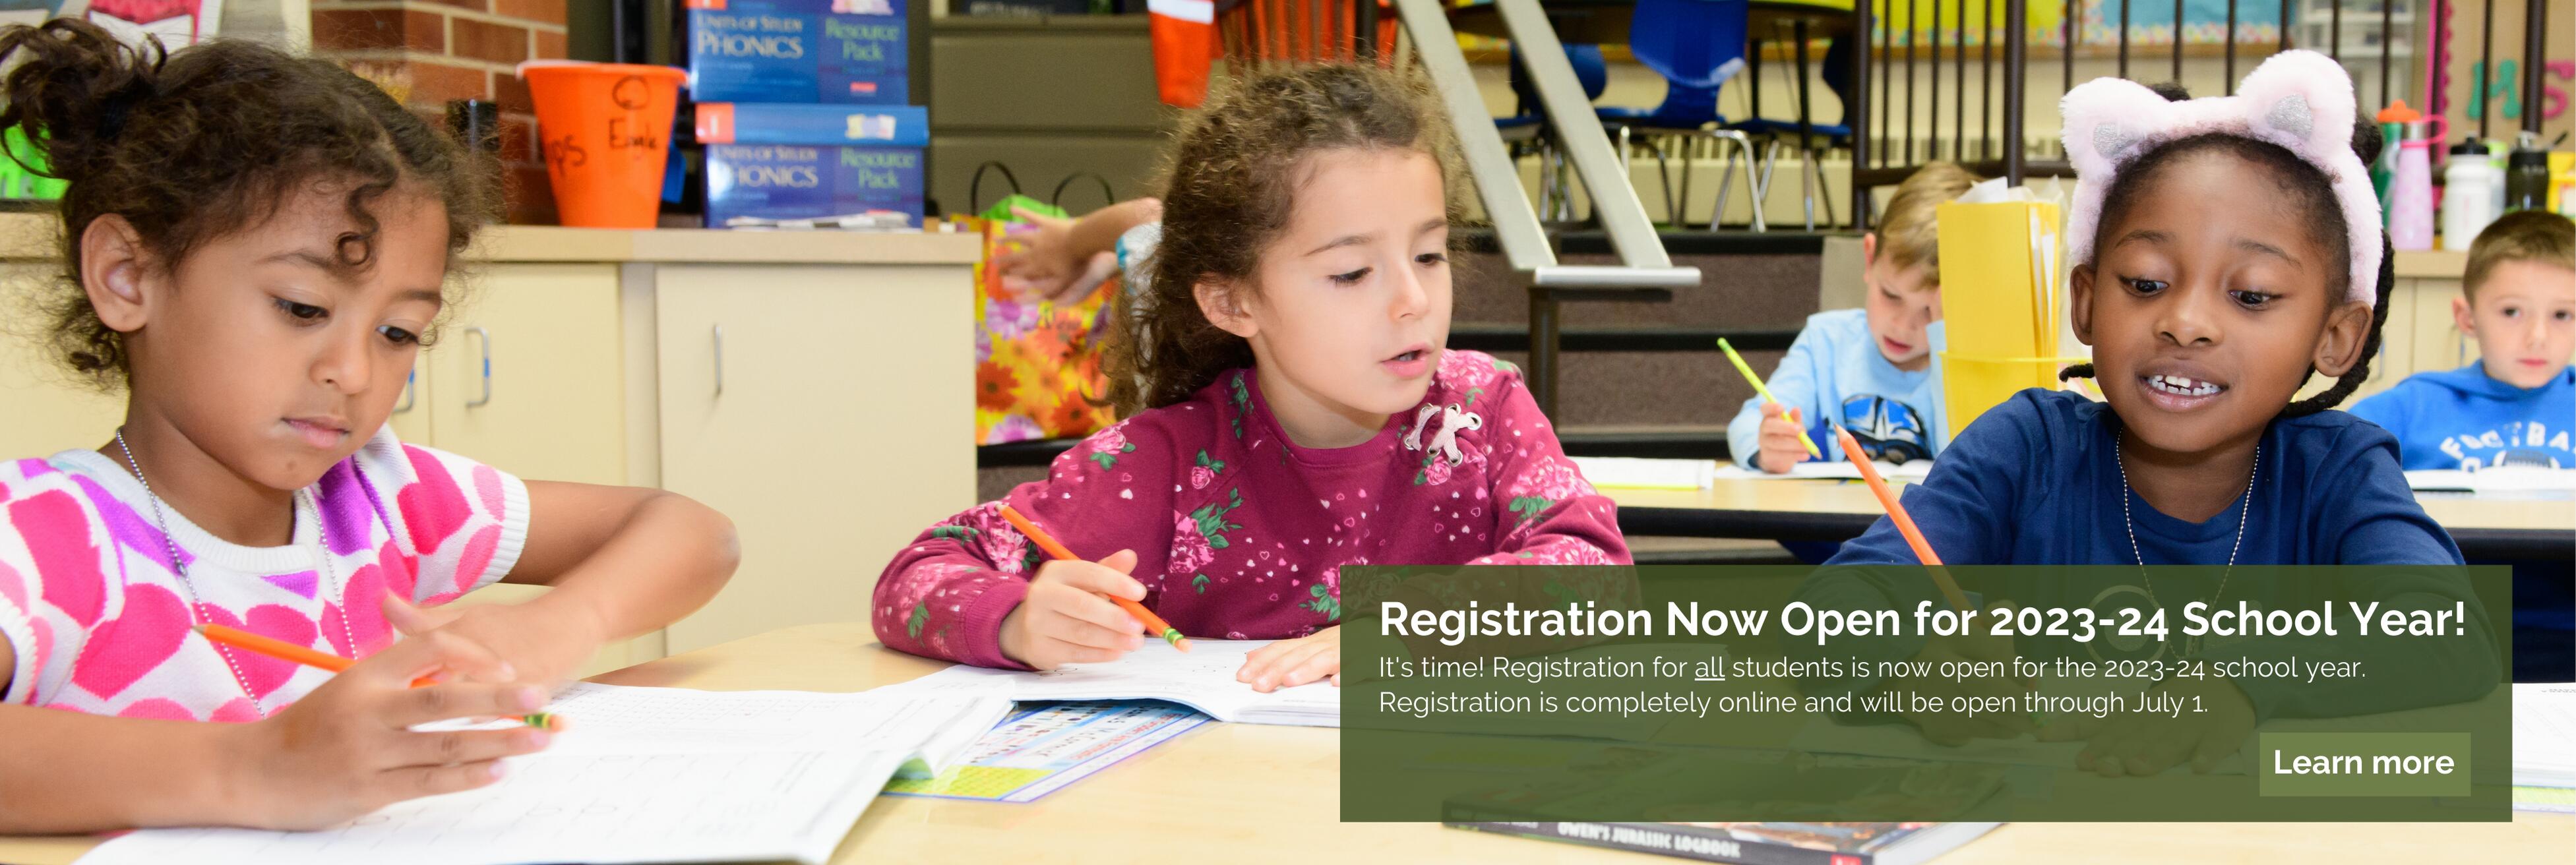 Registration now open for all students for the 2023-24 school year